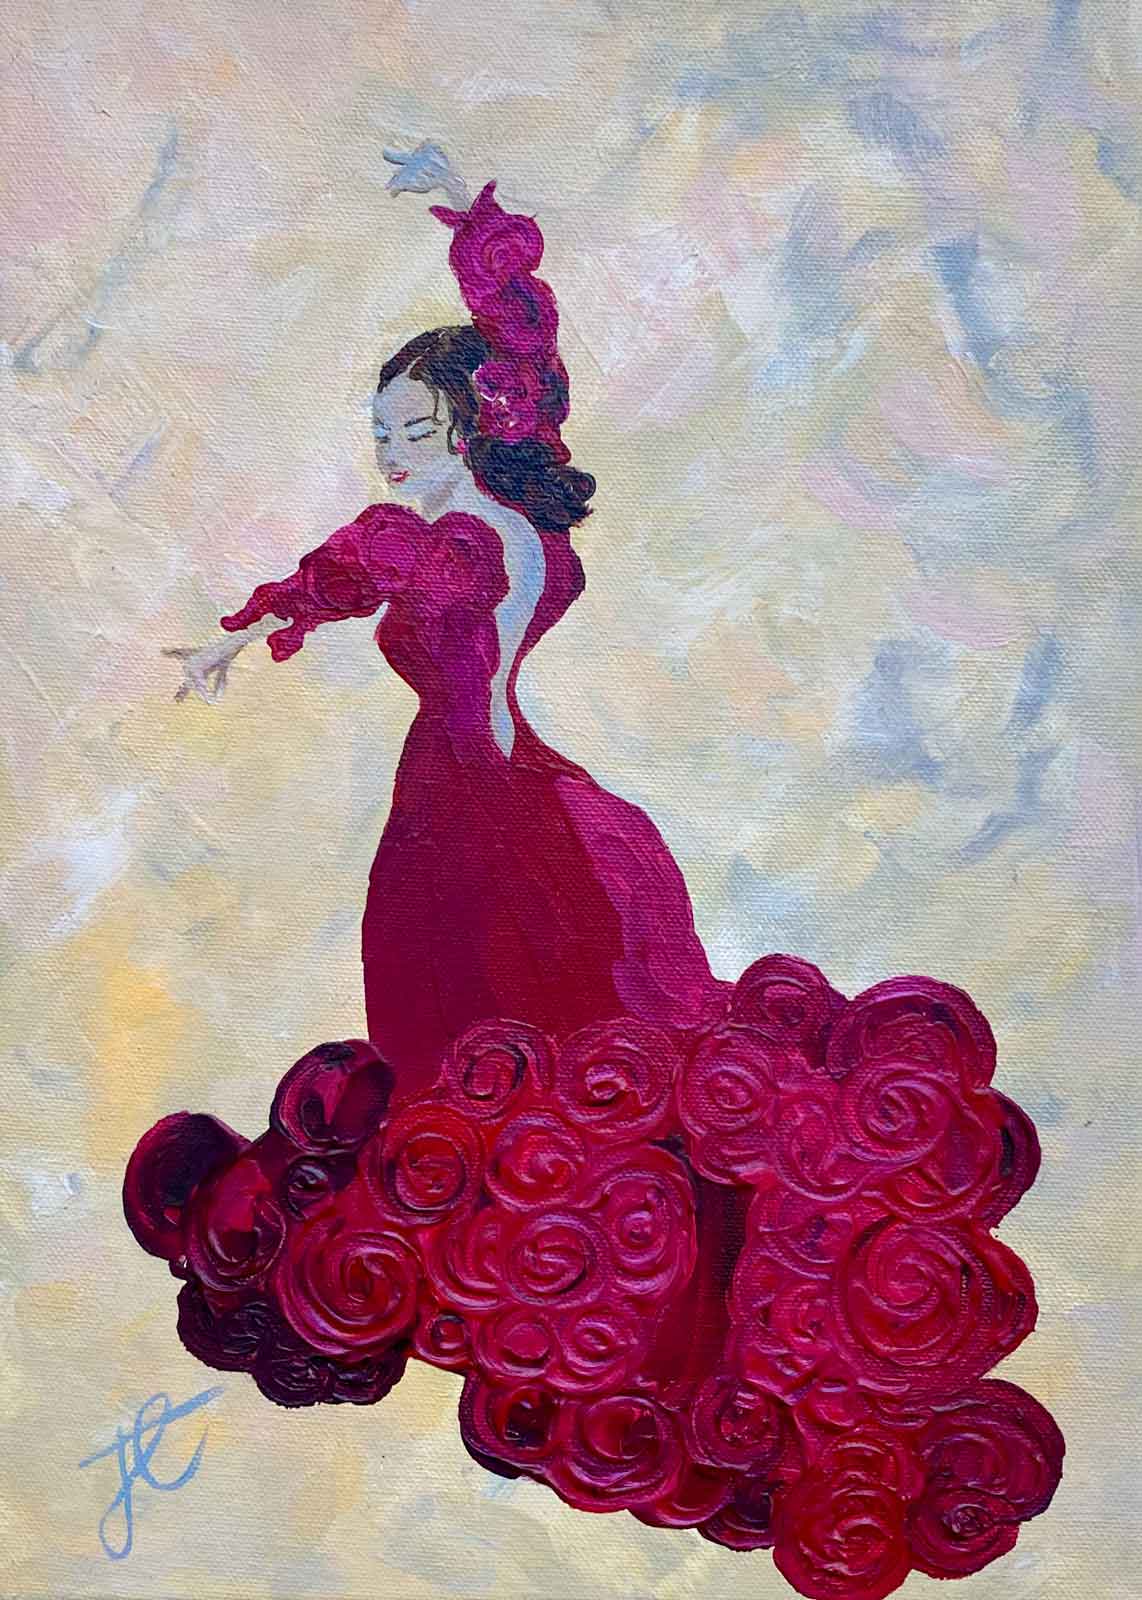 Painting of flamenco dancer in red dress with swirling skirt